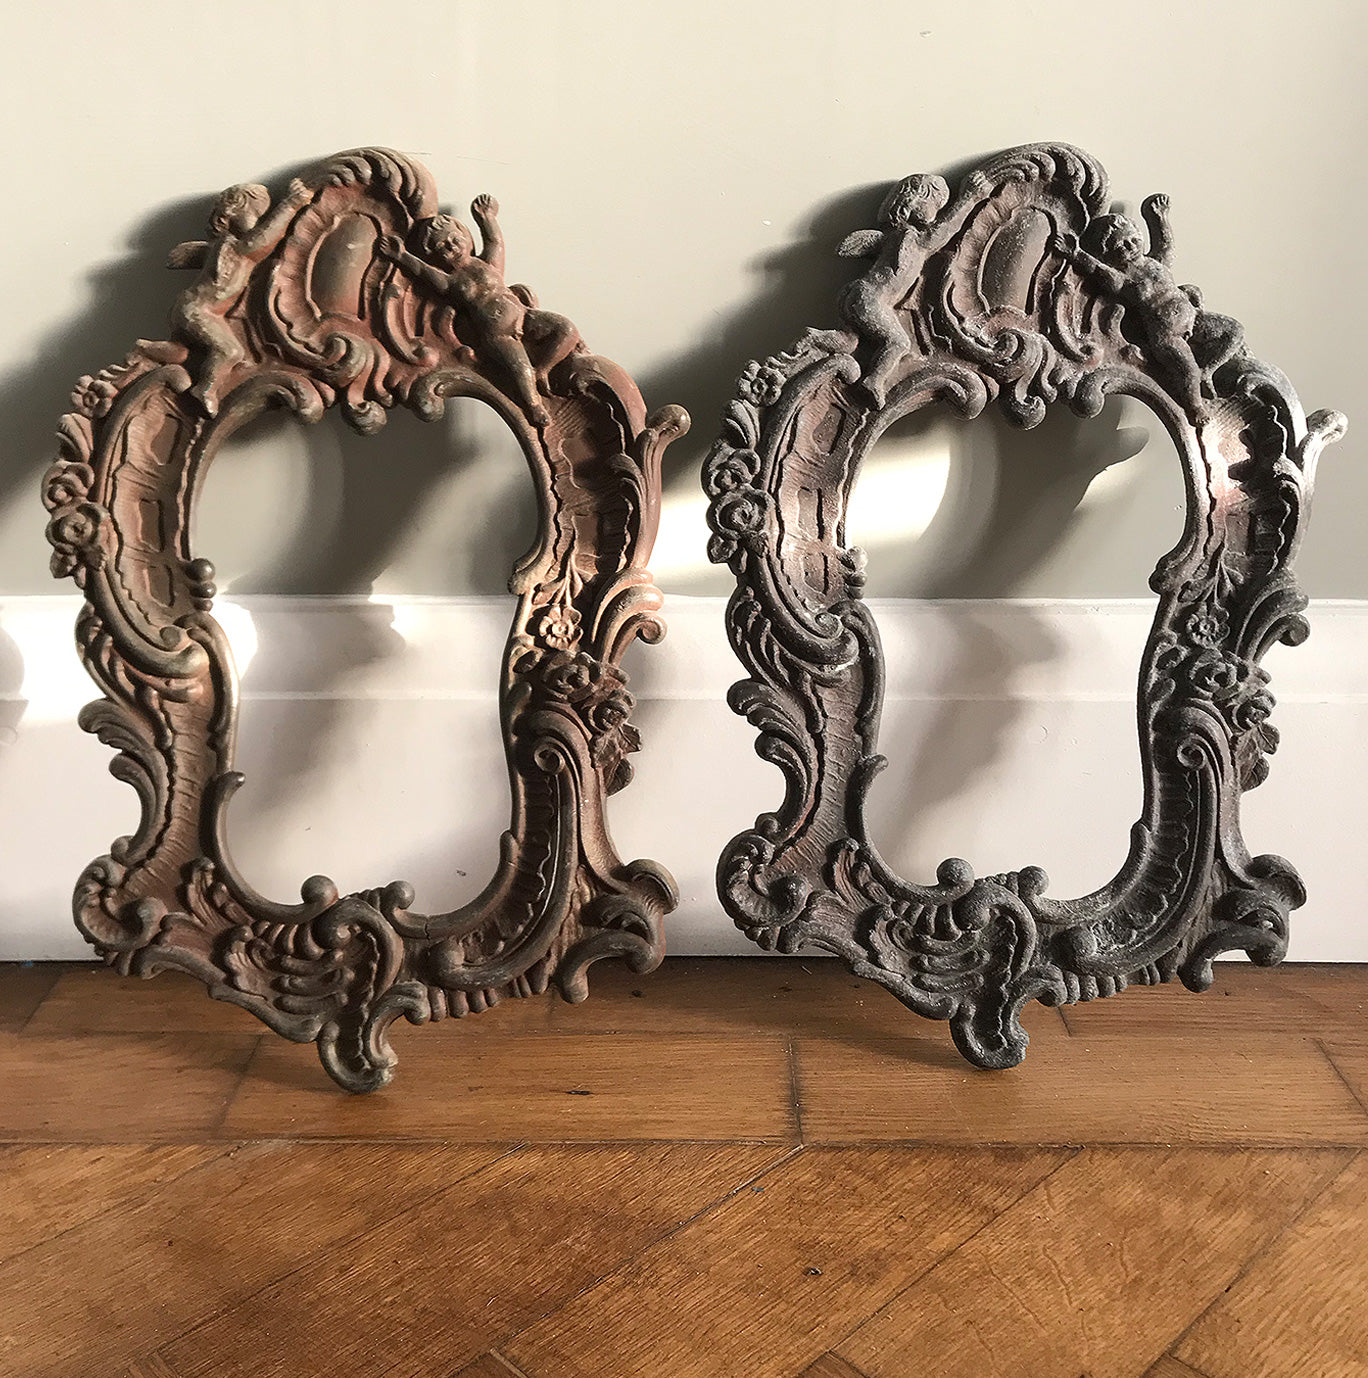 Lovely pair of Cast Metal Baroque Style Frames. Each frame has a couple of Cherubs at the top with flowing Baroque decoration around the rest of the frame - SHOP NOW - www.intovintage.co.uk